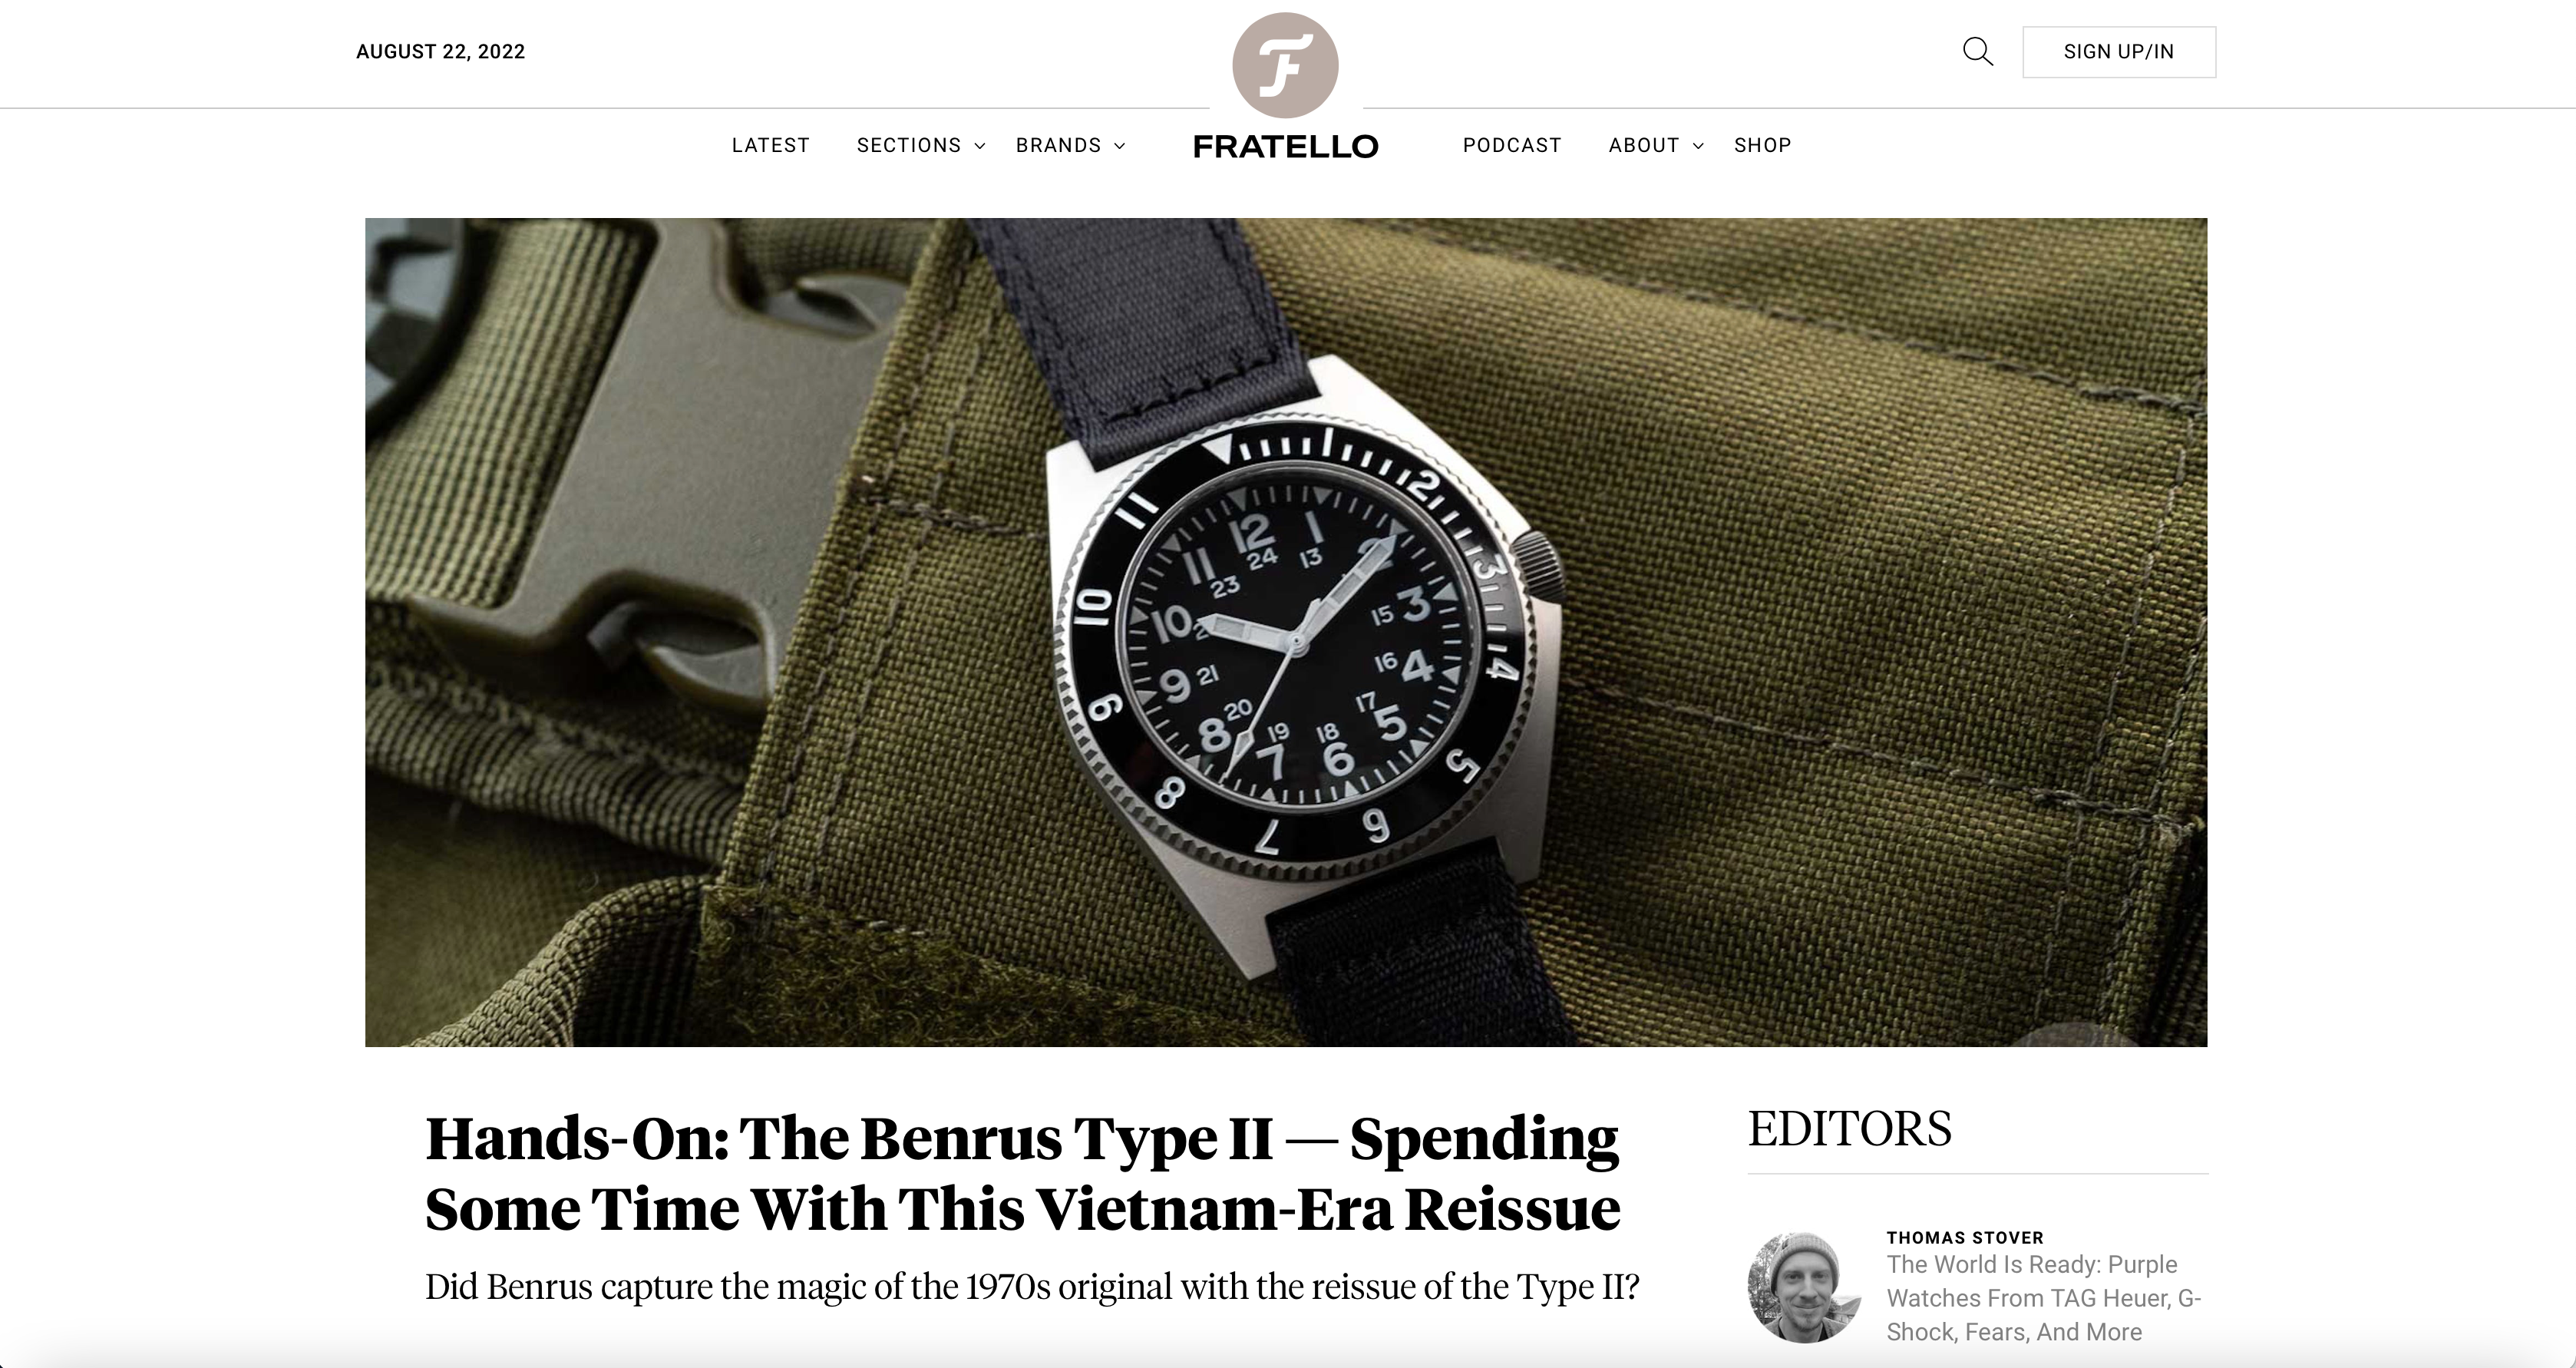 FRATELLOWATCHES.COM